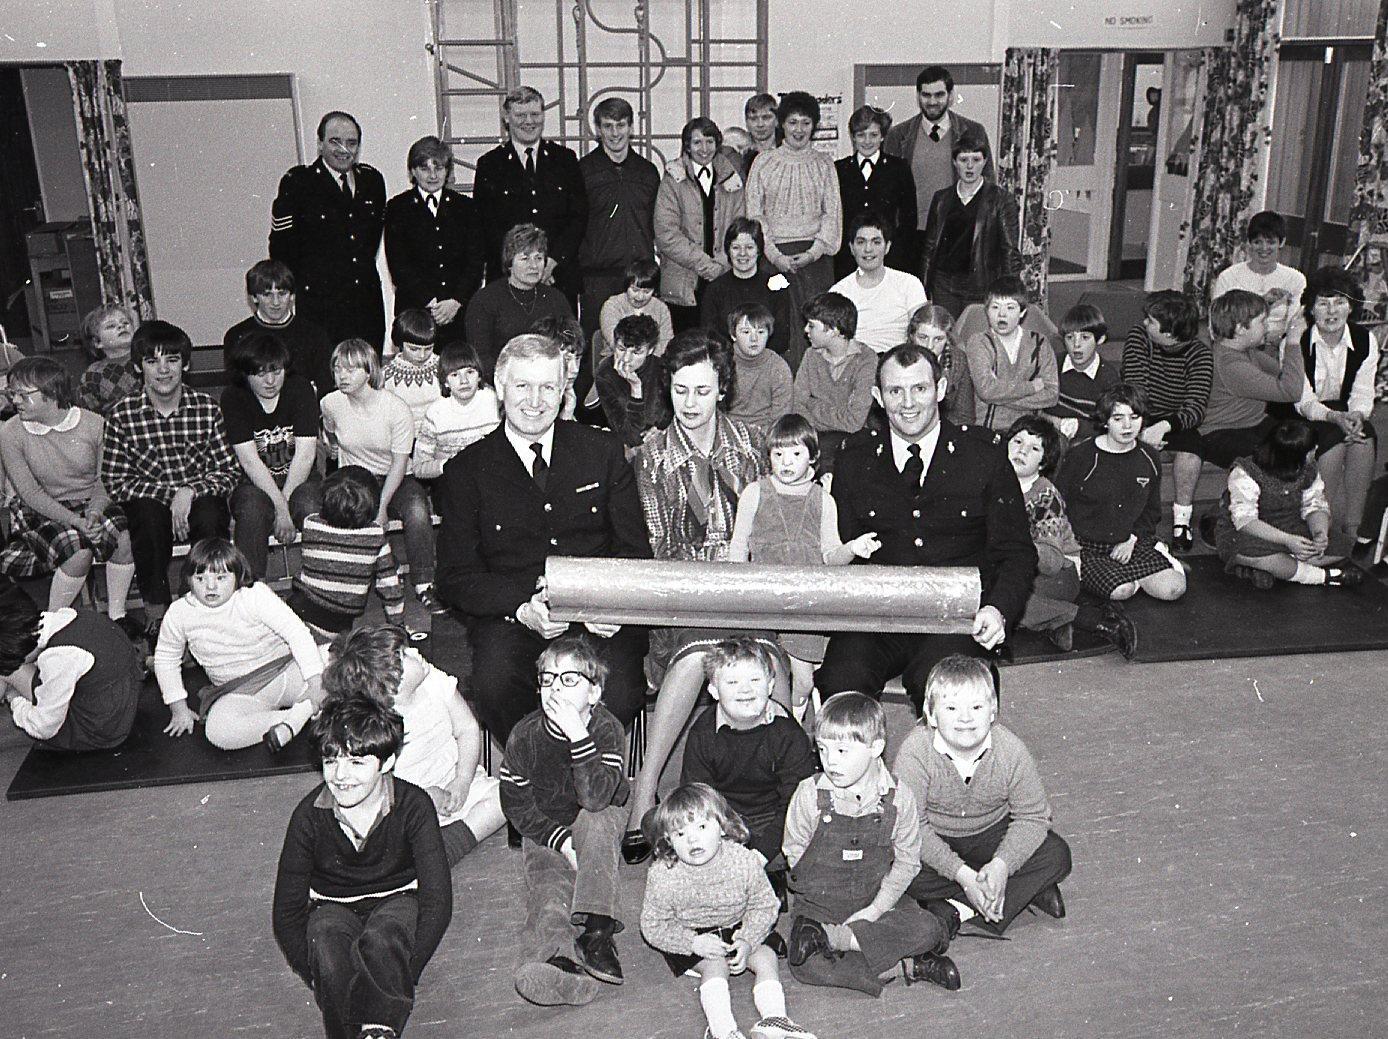 Police have come to the aid of The Coppice School in Bamber Bridge, who were in need of a major cash boost. Preston bobbies donated a four foot stick of rock they won in a TV contest, which will be raffled to provide funds for a minibus. Chief Supt Ken Mackay, left, and PC Alan Corlett present headmistress Miss Janice Harrison with the jumbo-sized rock. On PC Corlett's left is his daughter Shelley